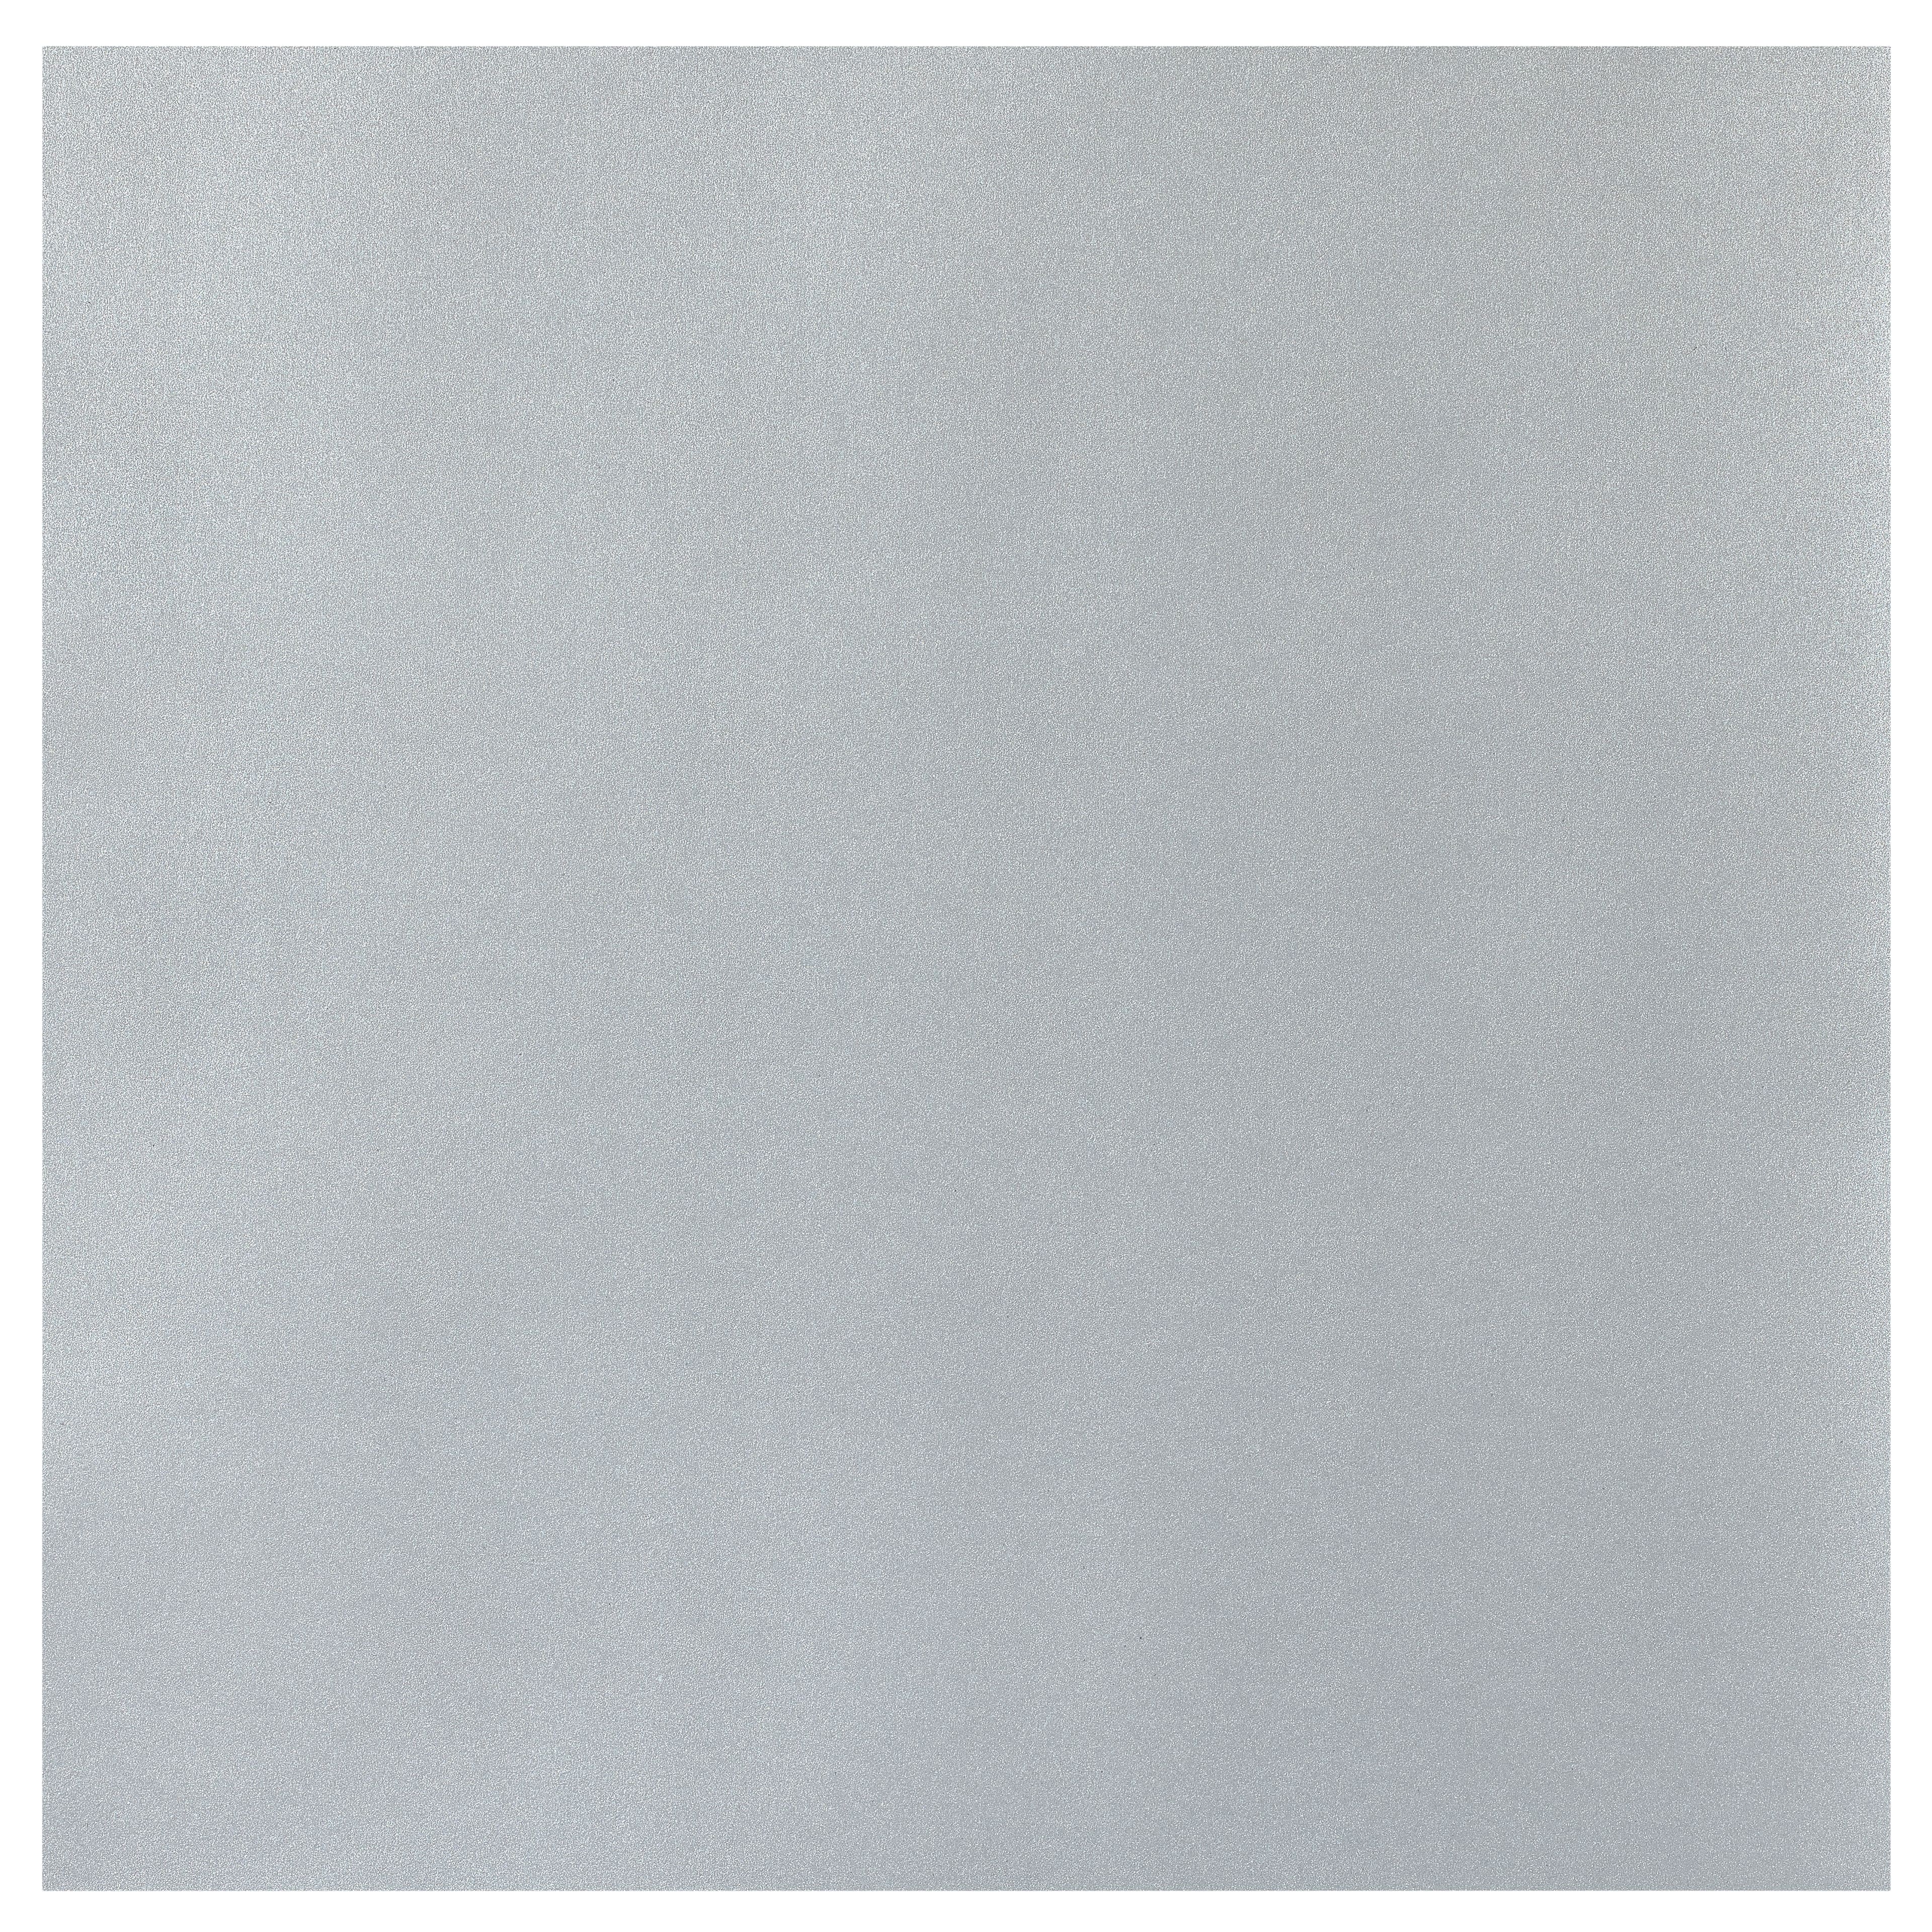 Curious Metallics White Silver 12 x 12 111# Cover Sheets Pack of 50